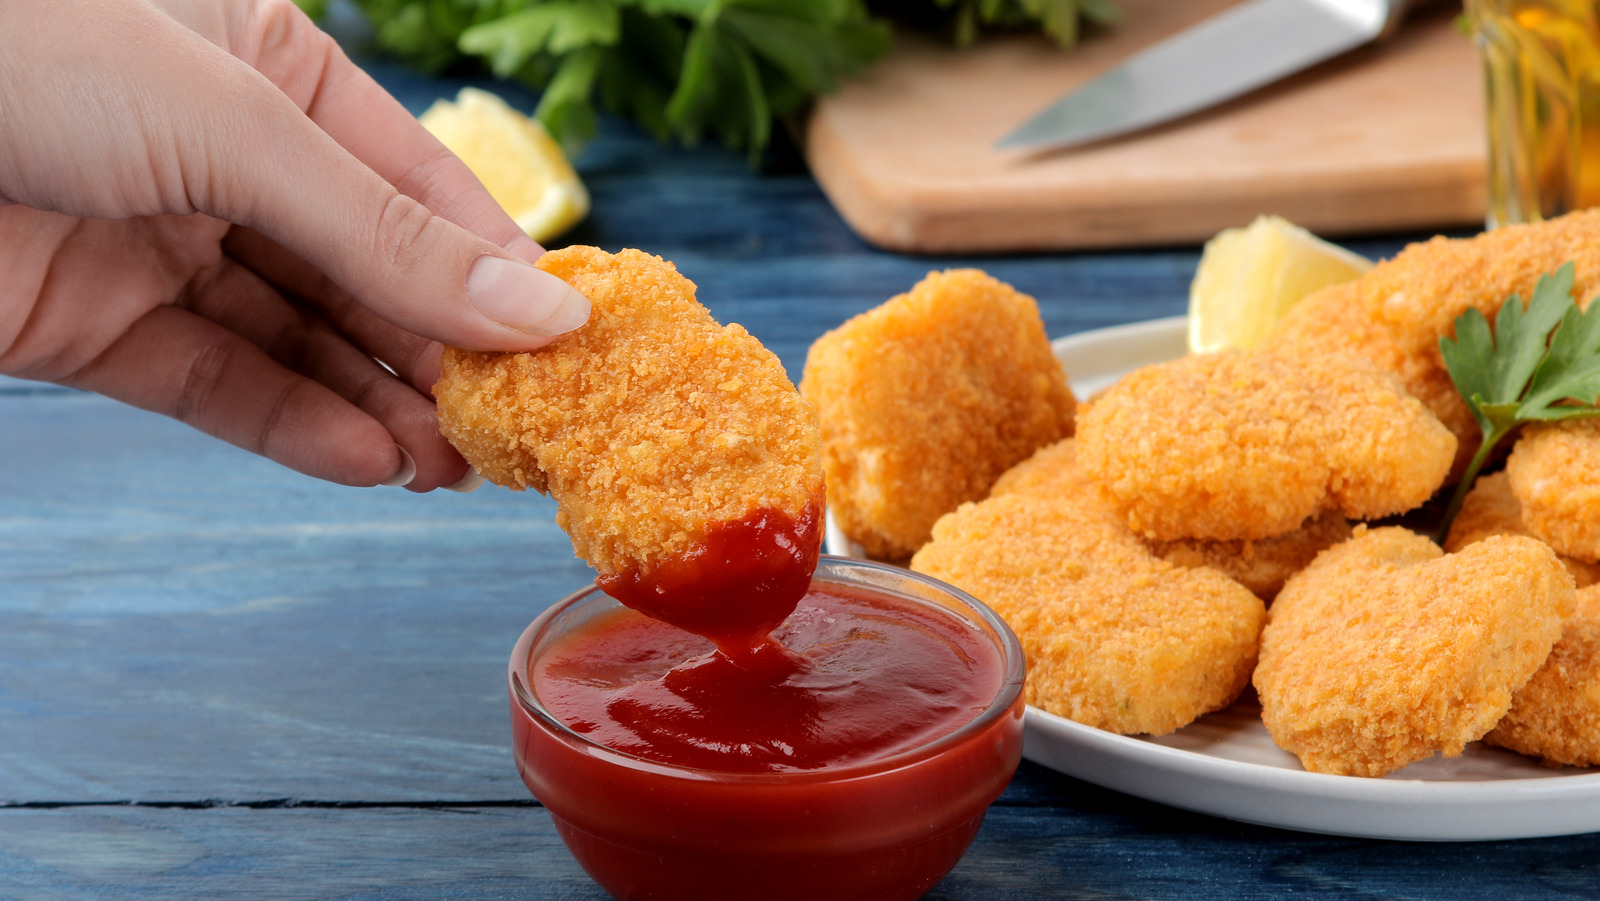 Only 8% Of People Consider This Their Favorite Chicken Nugget Dipping Sauce